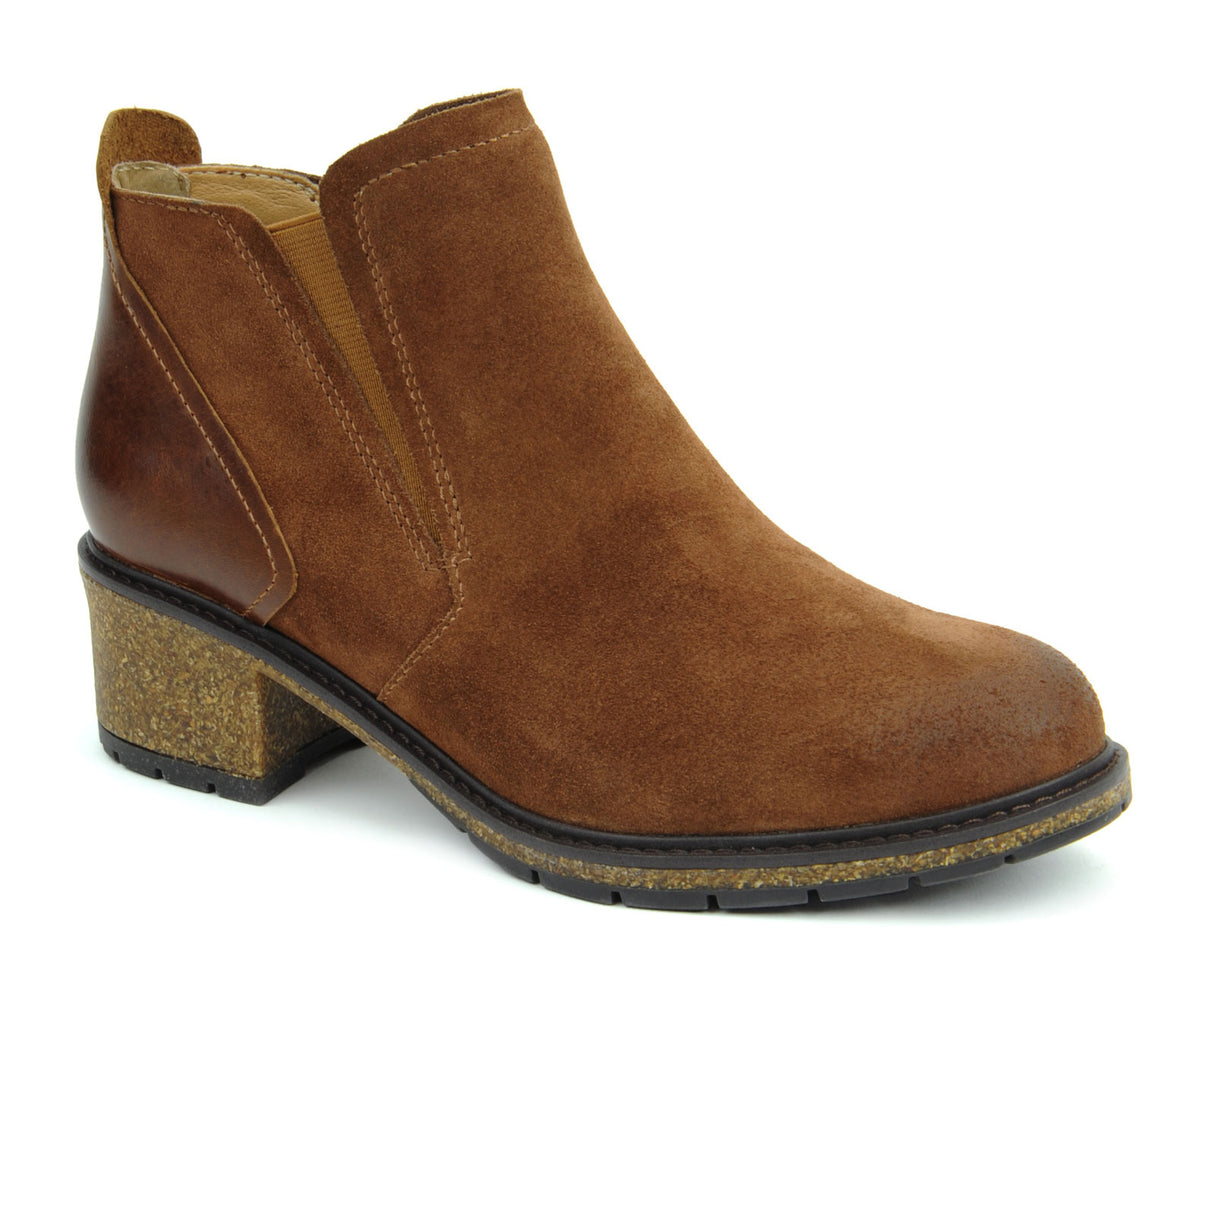 Aetrex Frankie Boot (Women) - Brown Boots - Fashion - Ankle Boot - The Heel Shoe Fitters